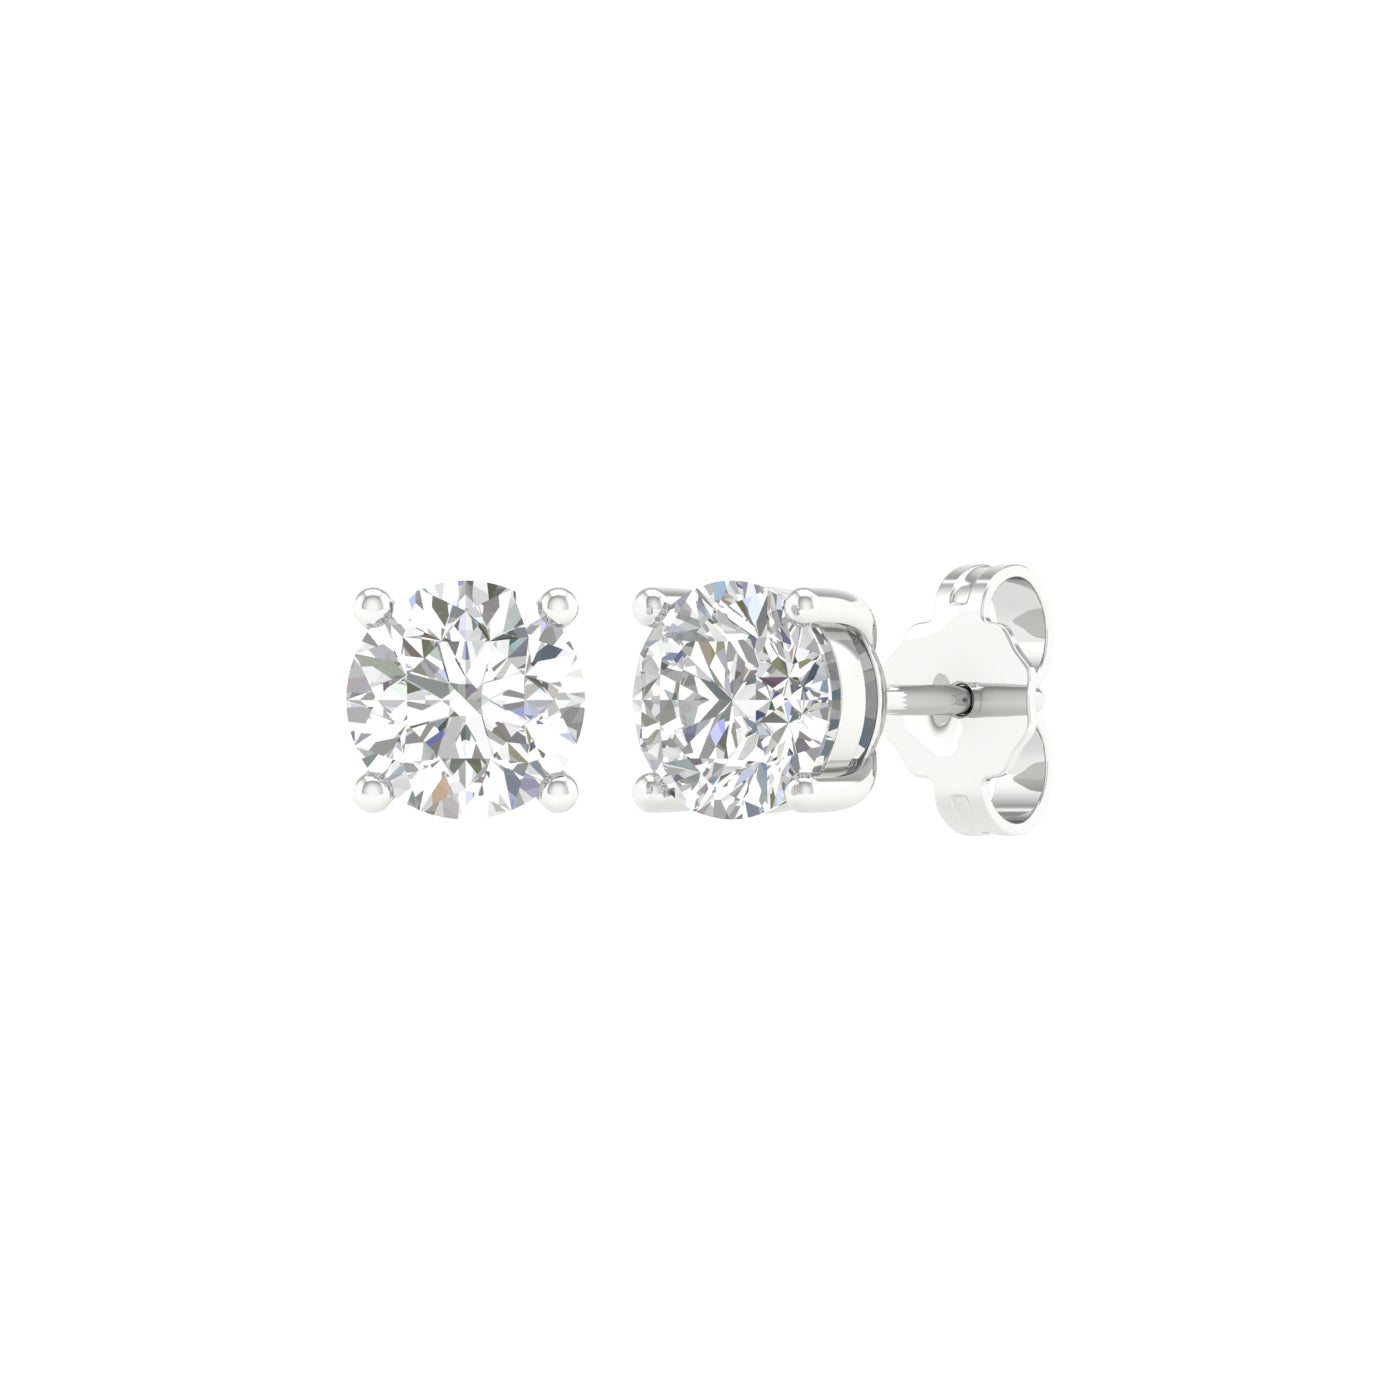 1 ¼ Carat Round Lab Grown Diamond 14K Gold Solitaire Stud Earrings